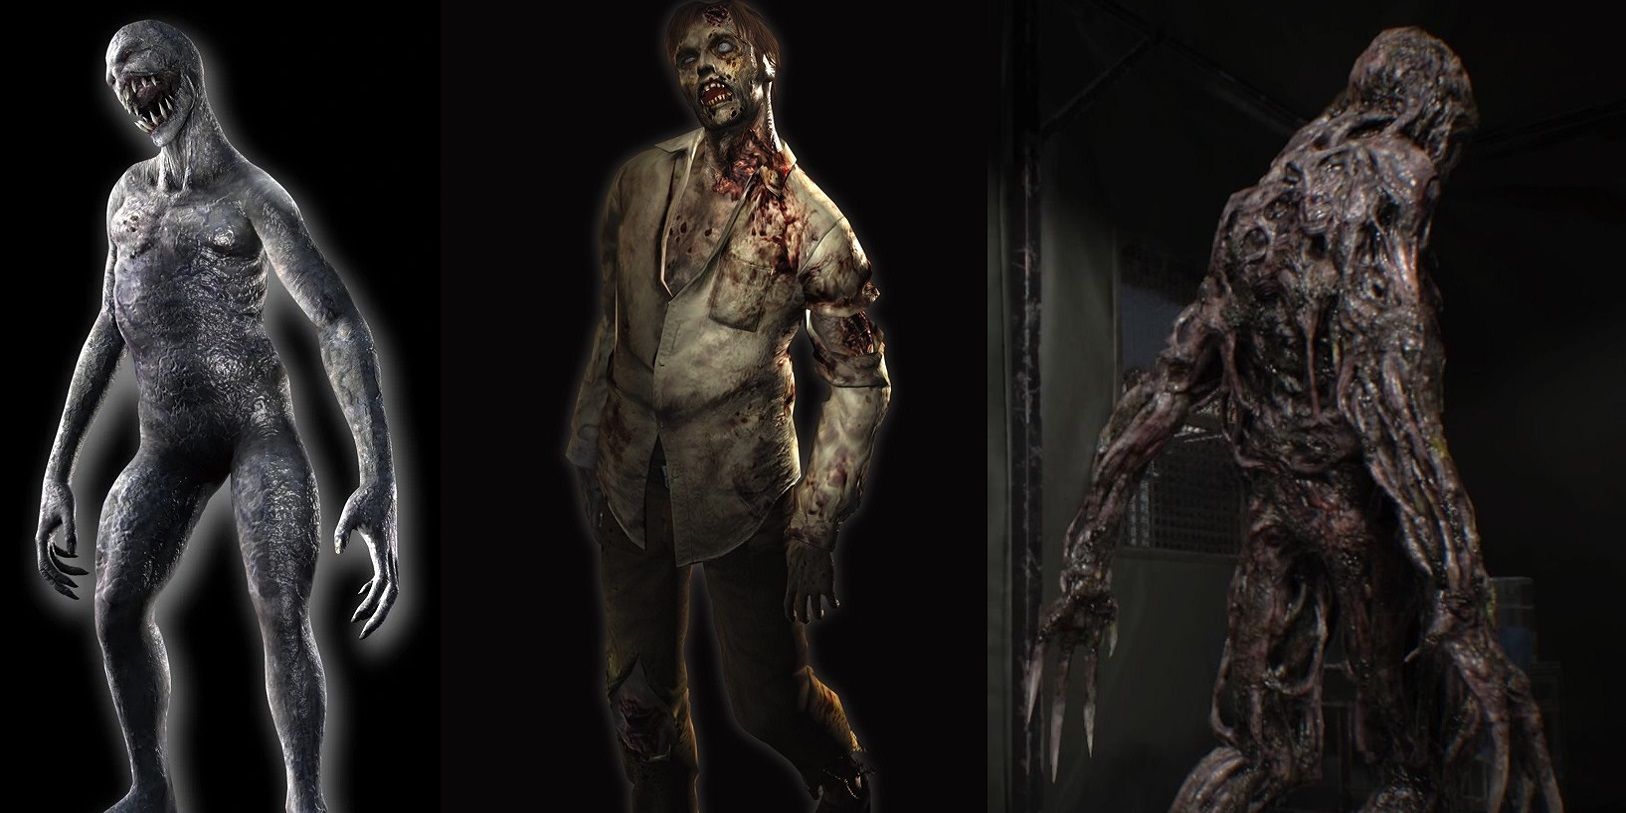 The worst monsters to appear in the Resident Evil series, and should never show up again.